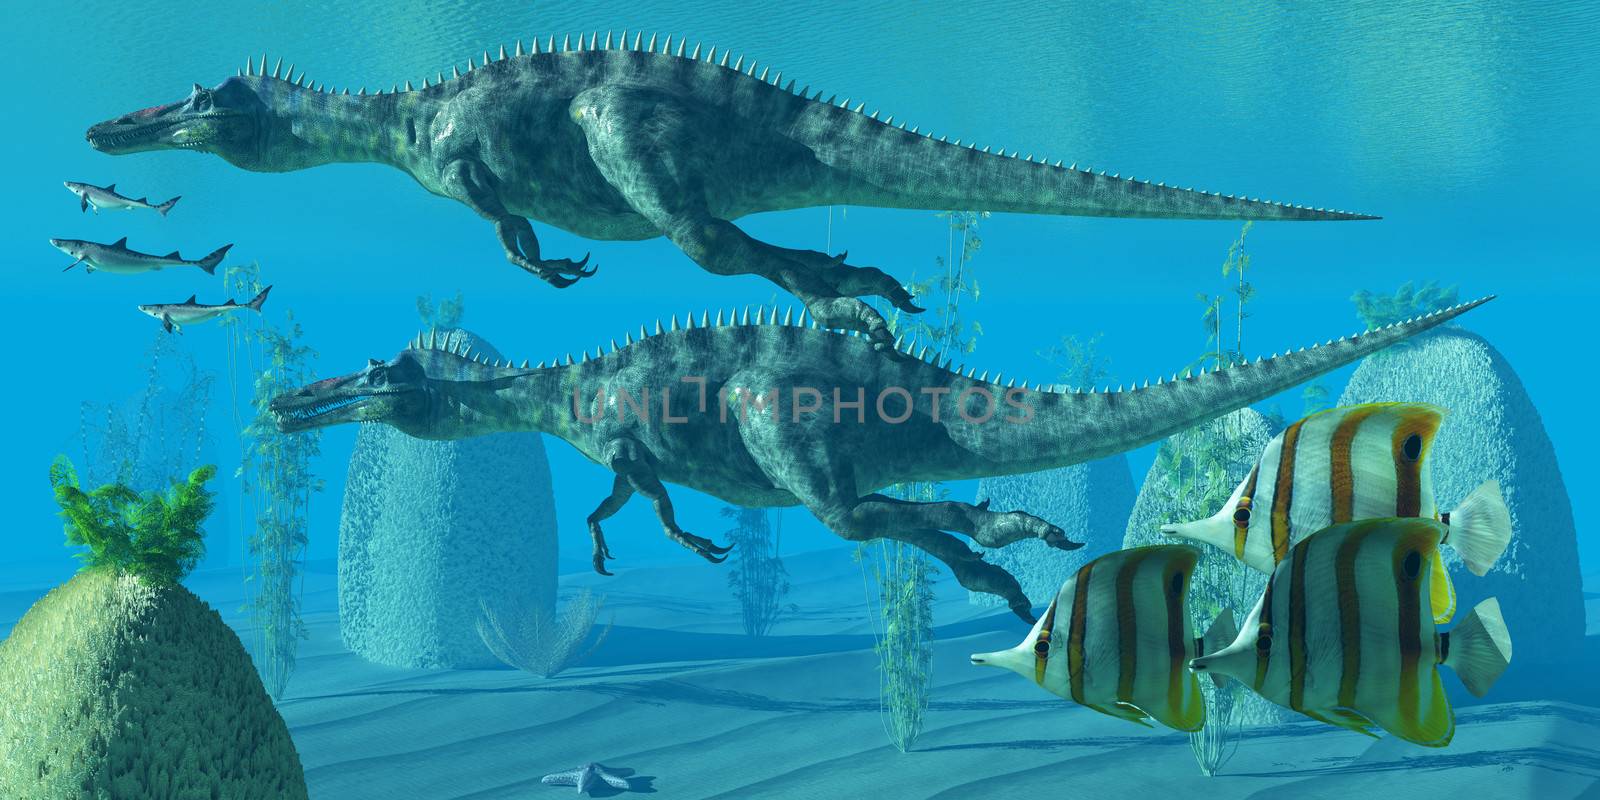 Two Suchomimus dinosaurs dive and search for big fish prey to capture and eat.